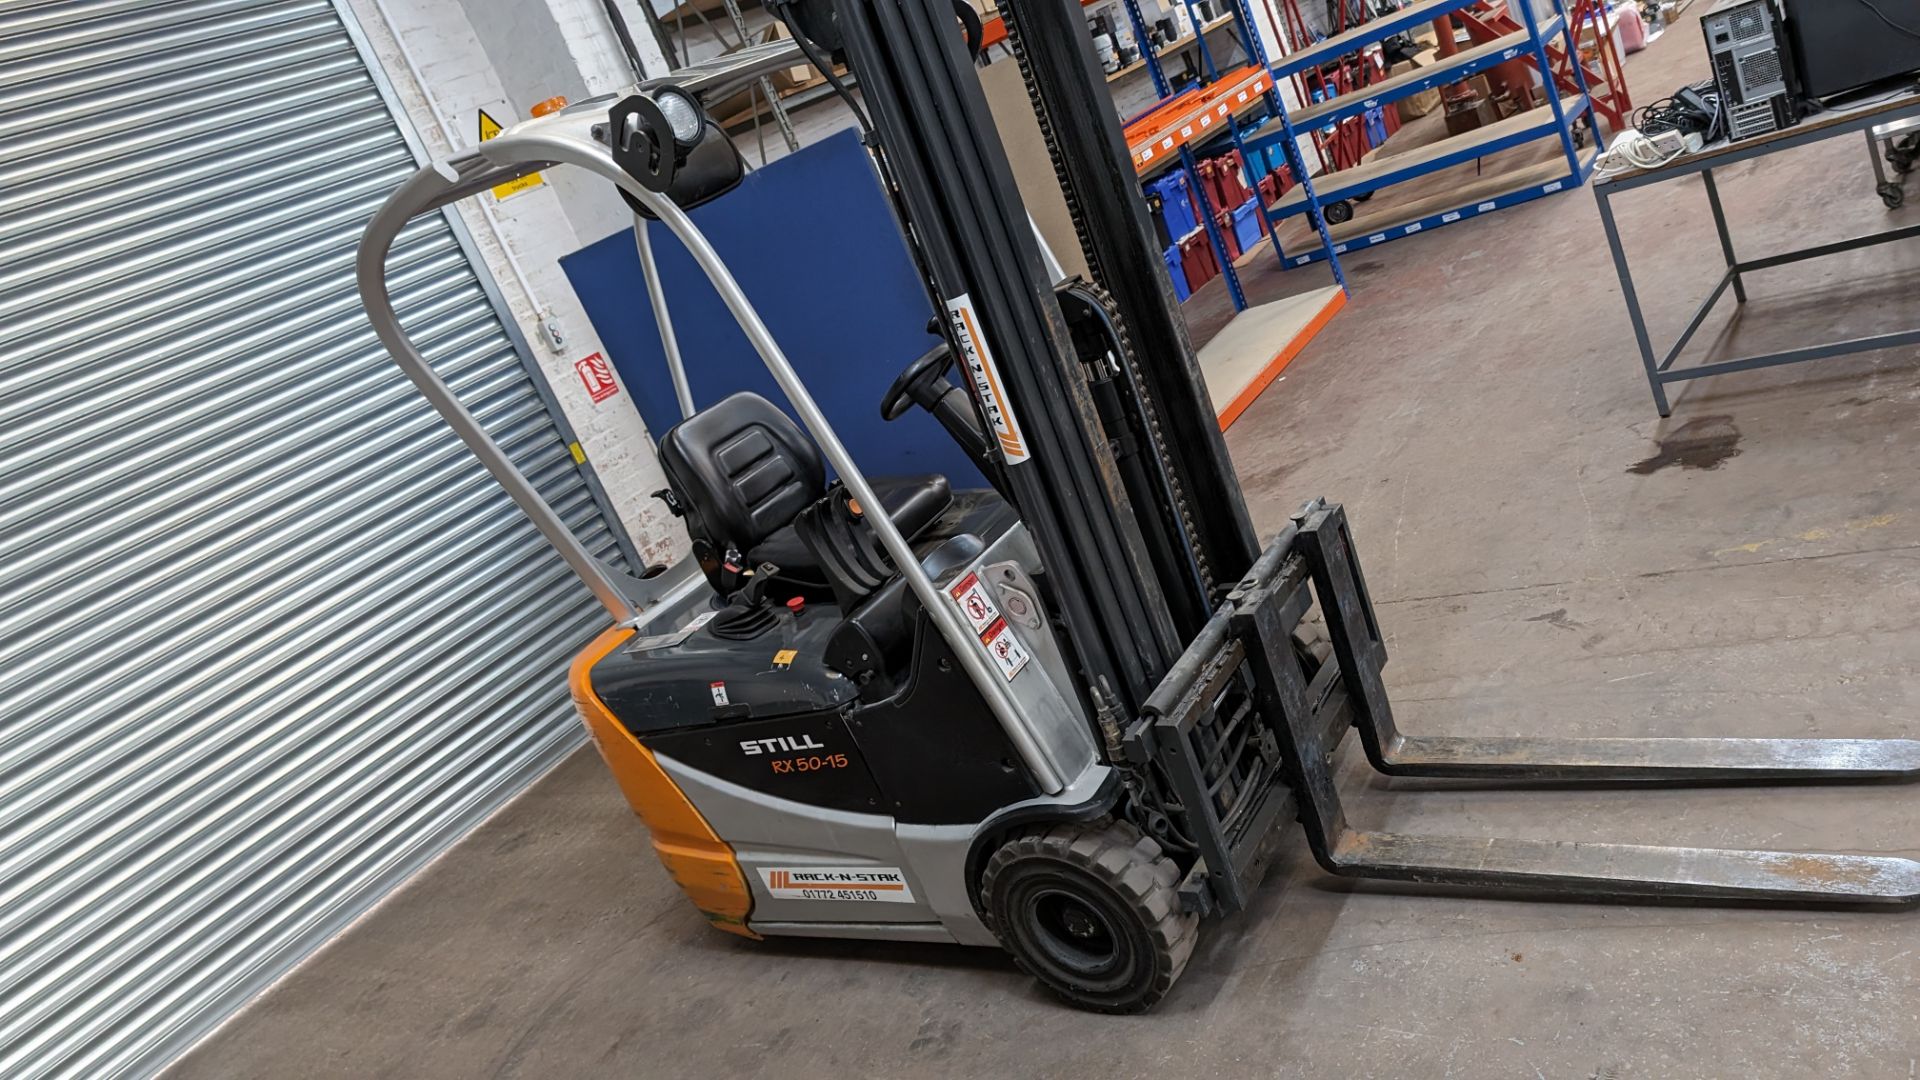 Still model RX-5015 3-wheel electric forklift truck with sideshift, 1.5 tonne capacity, including St - Image 13 of 18